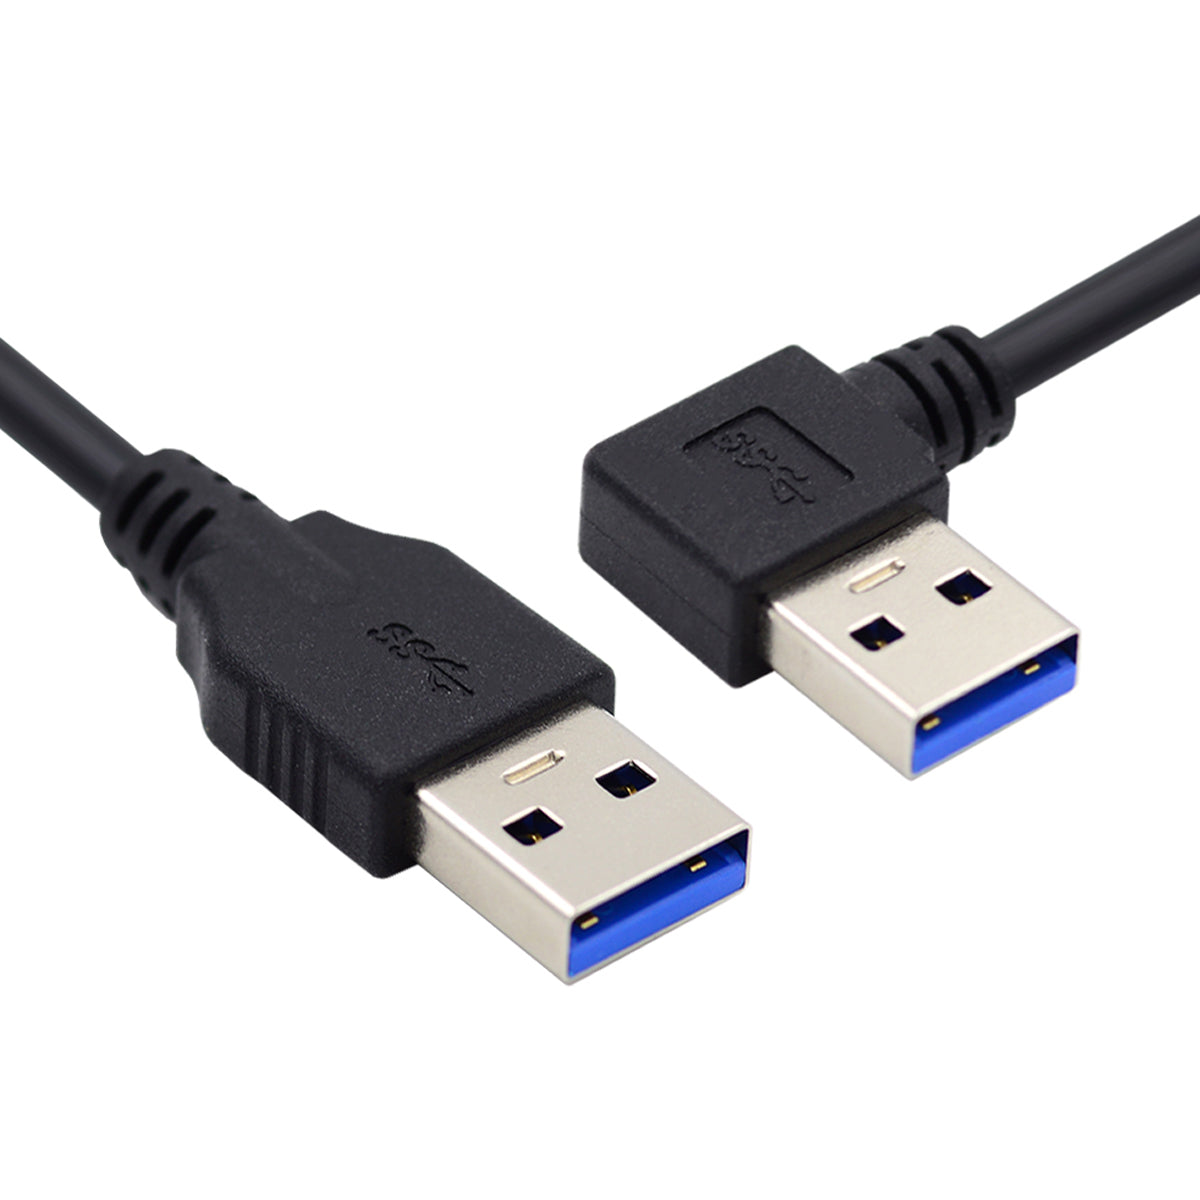 U3-069-LE 90 Degree Angled USB 3.0 Type-A Male to Straight 3.0 Type-A Male Cable 40cm 5Gbps Data Cord